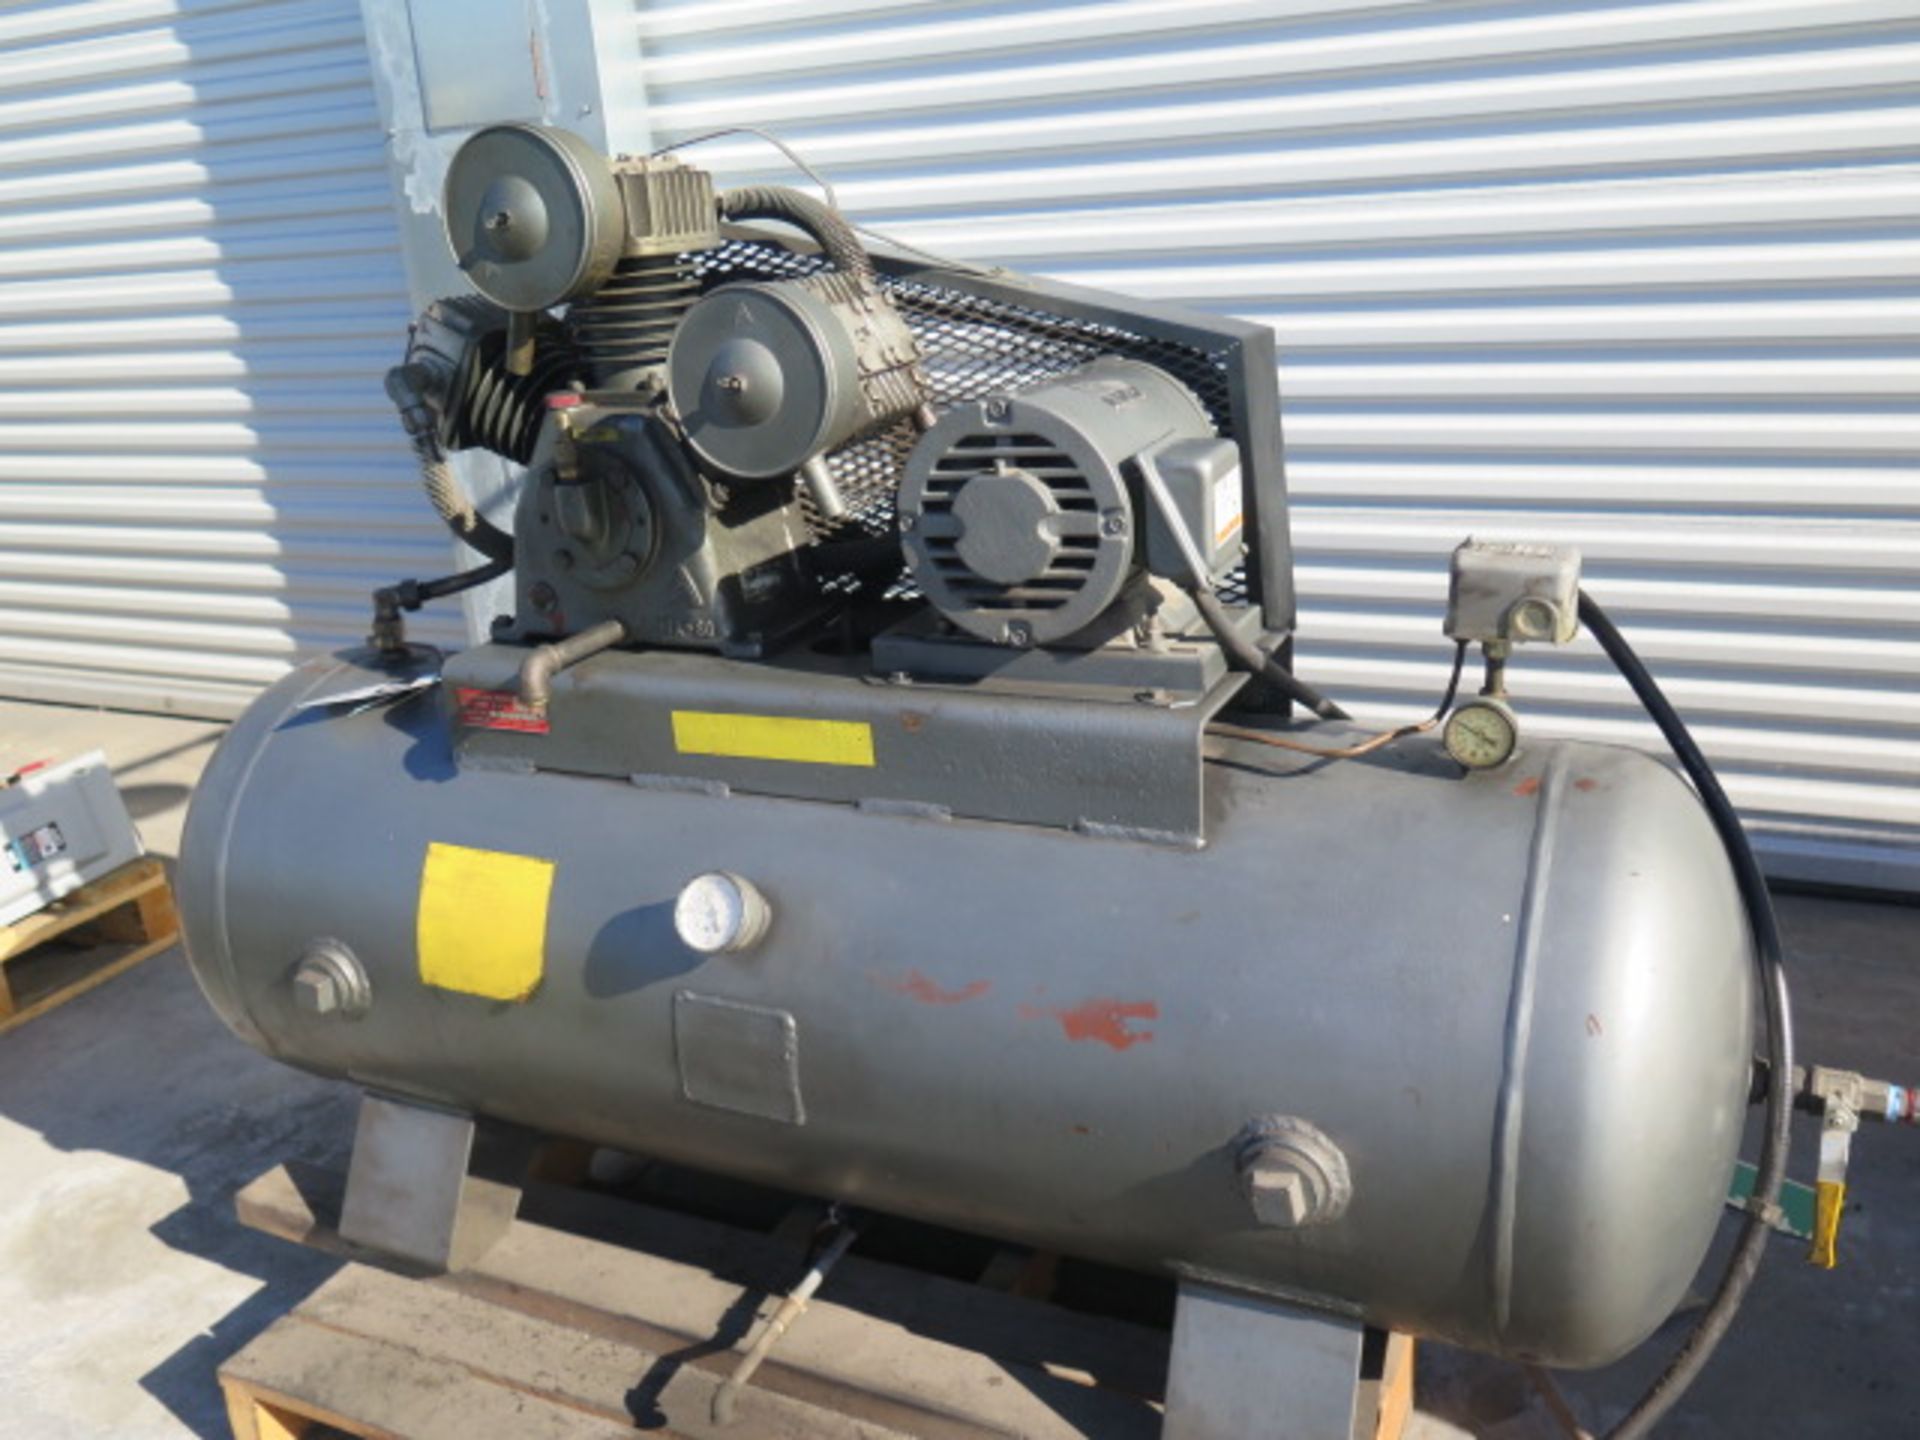 5Hp Horizontal Air Compressor w/ 3-Stage Pump, 80 Gallon Tank (SOLD AS-IS - NO WARRANTY) - Image 2 of 5